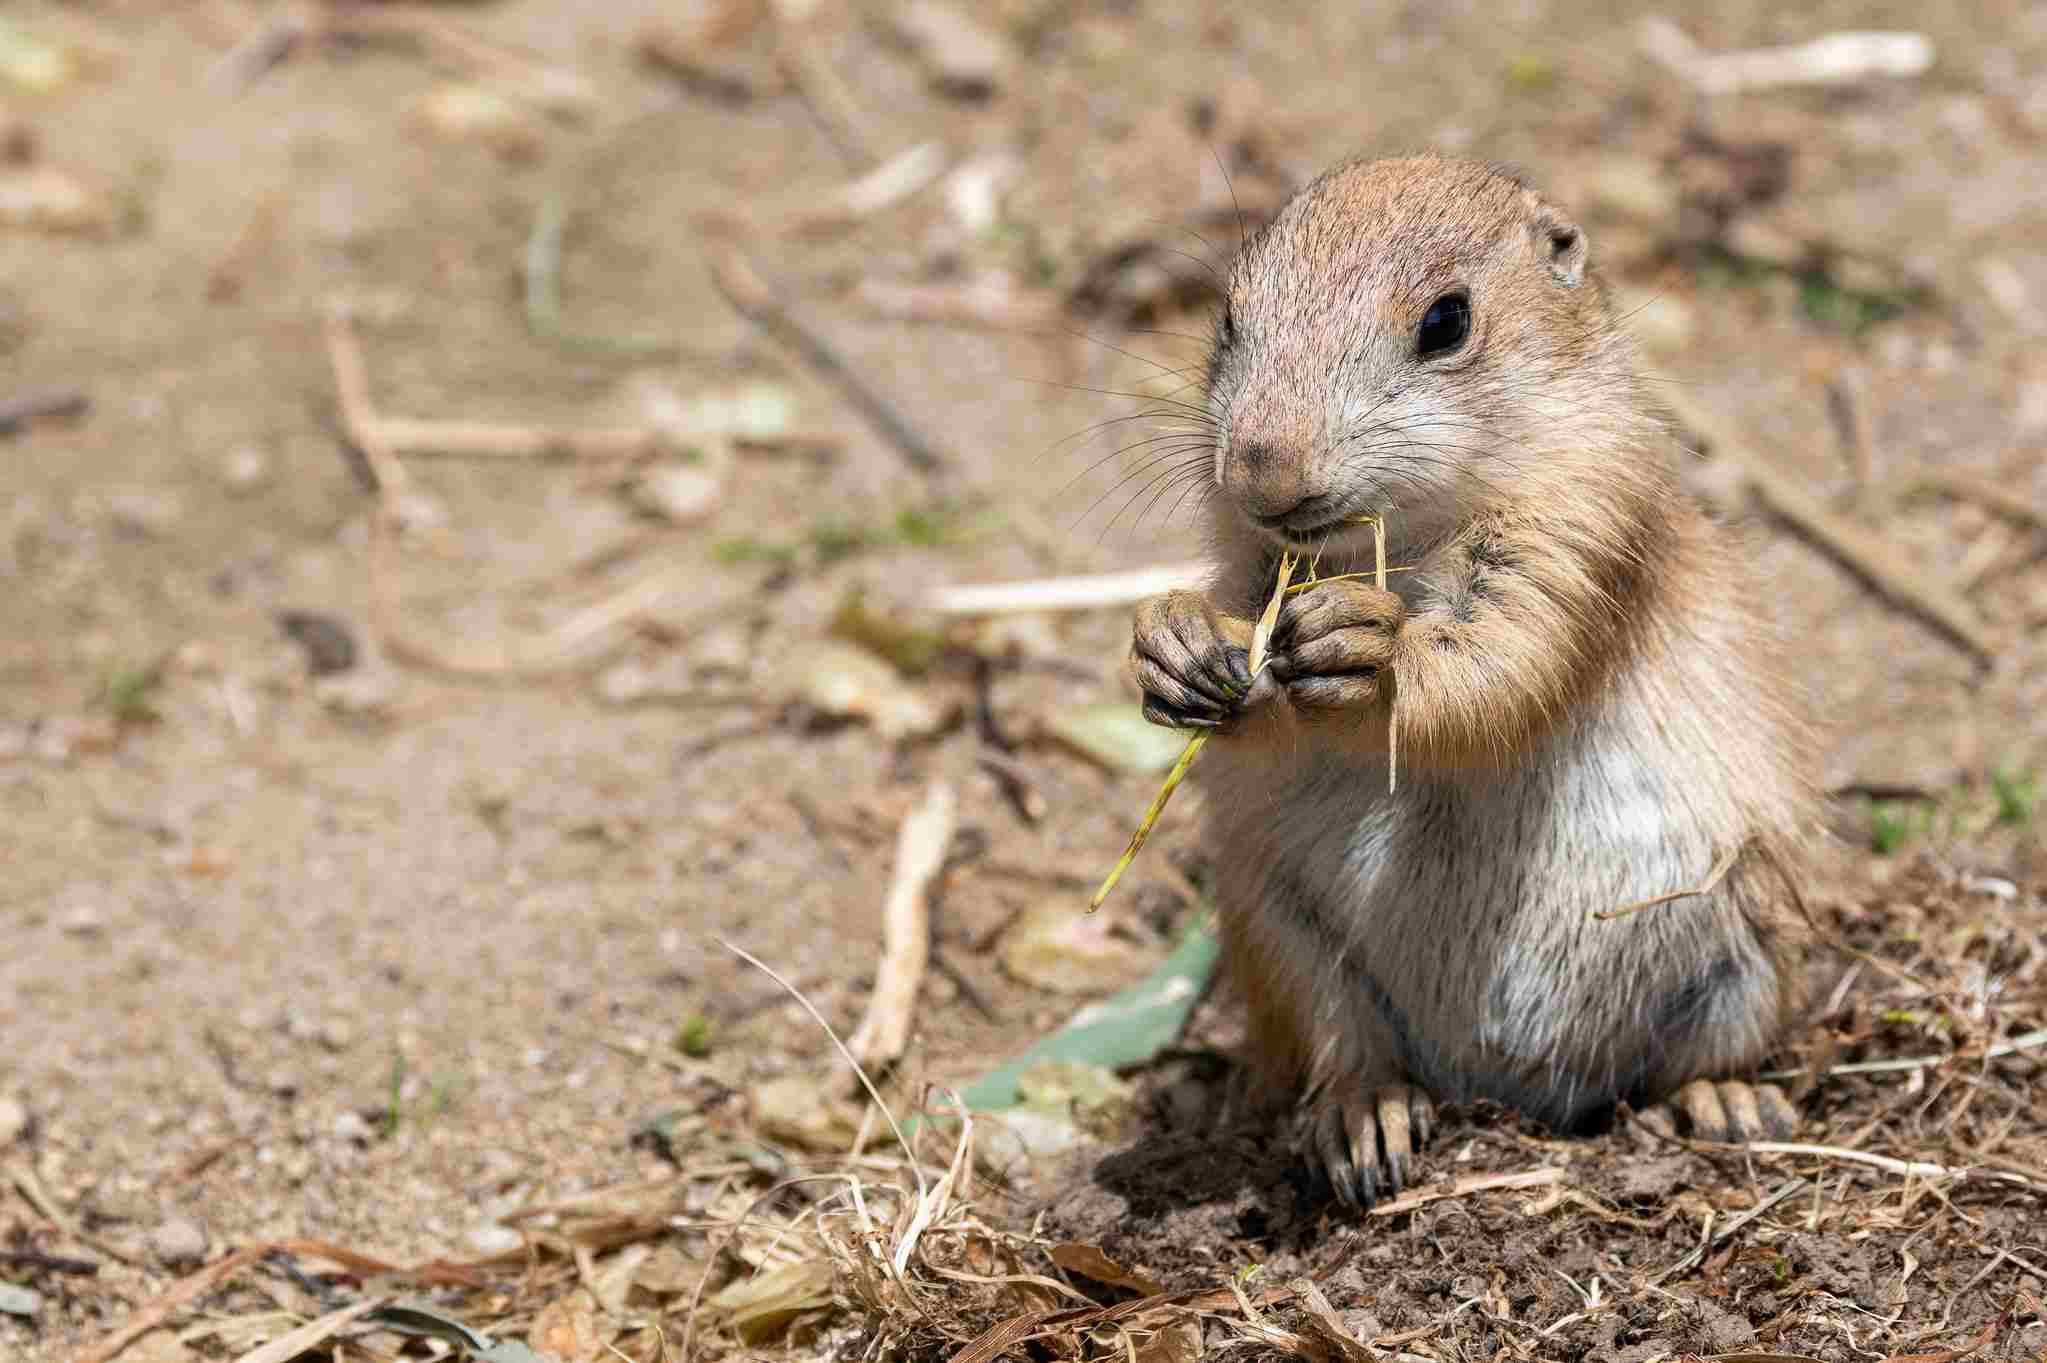 What Do Prairie Dogs Eat: Foliage from Grasses, Shrubs and Forbs Serves. Food for Prairie Dogs (Credit: Eric Kilby 2017, Uploaded Online 2018 .CC BY-SA 2.0.)